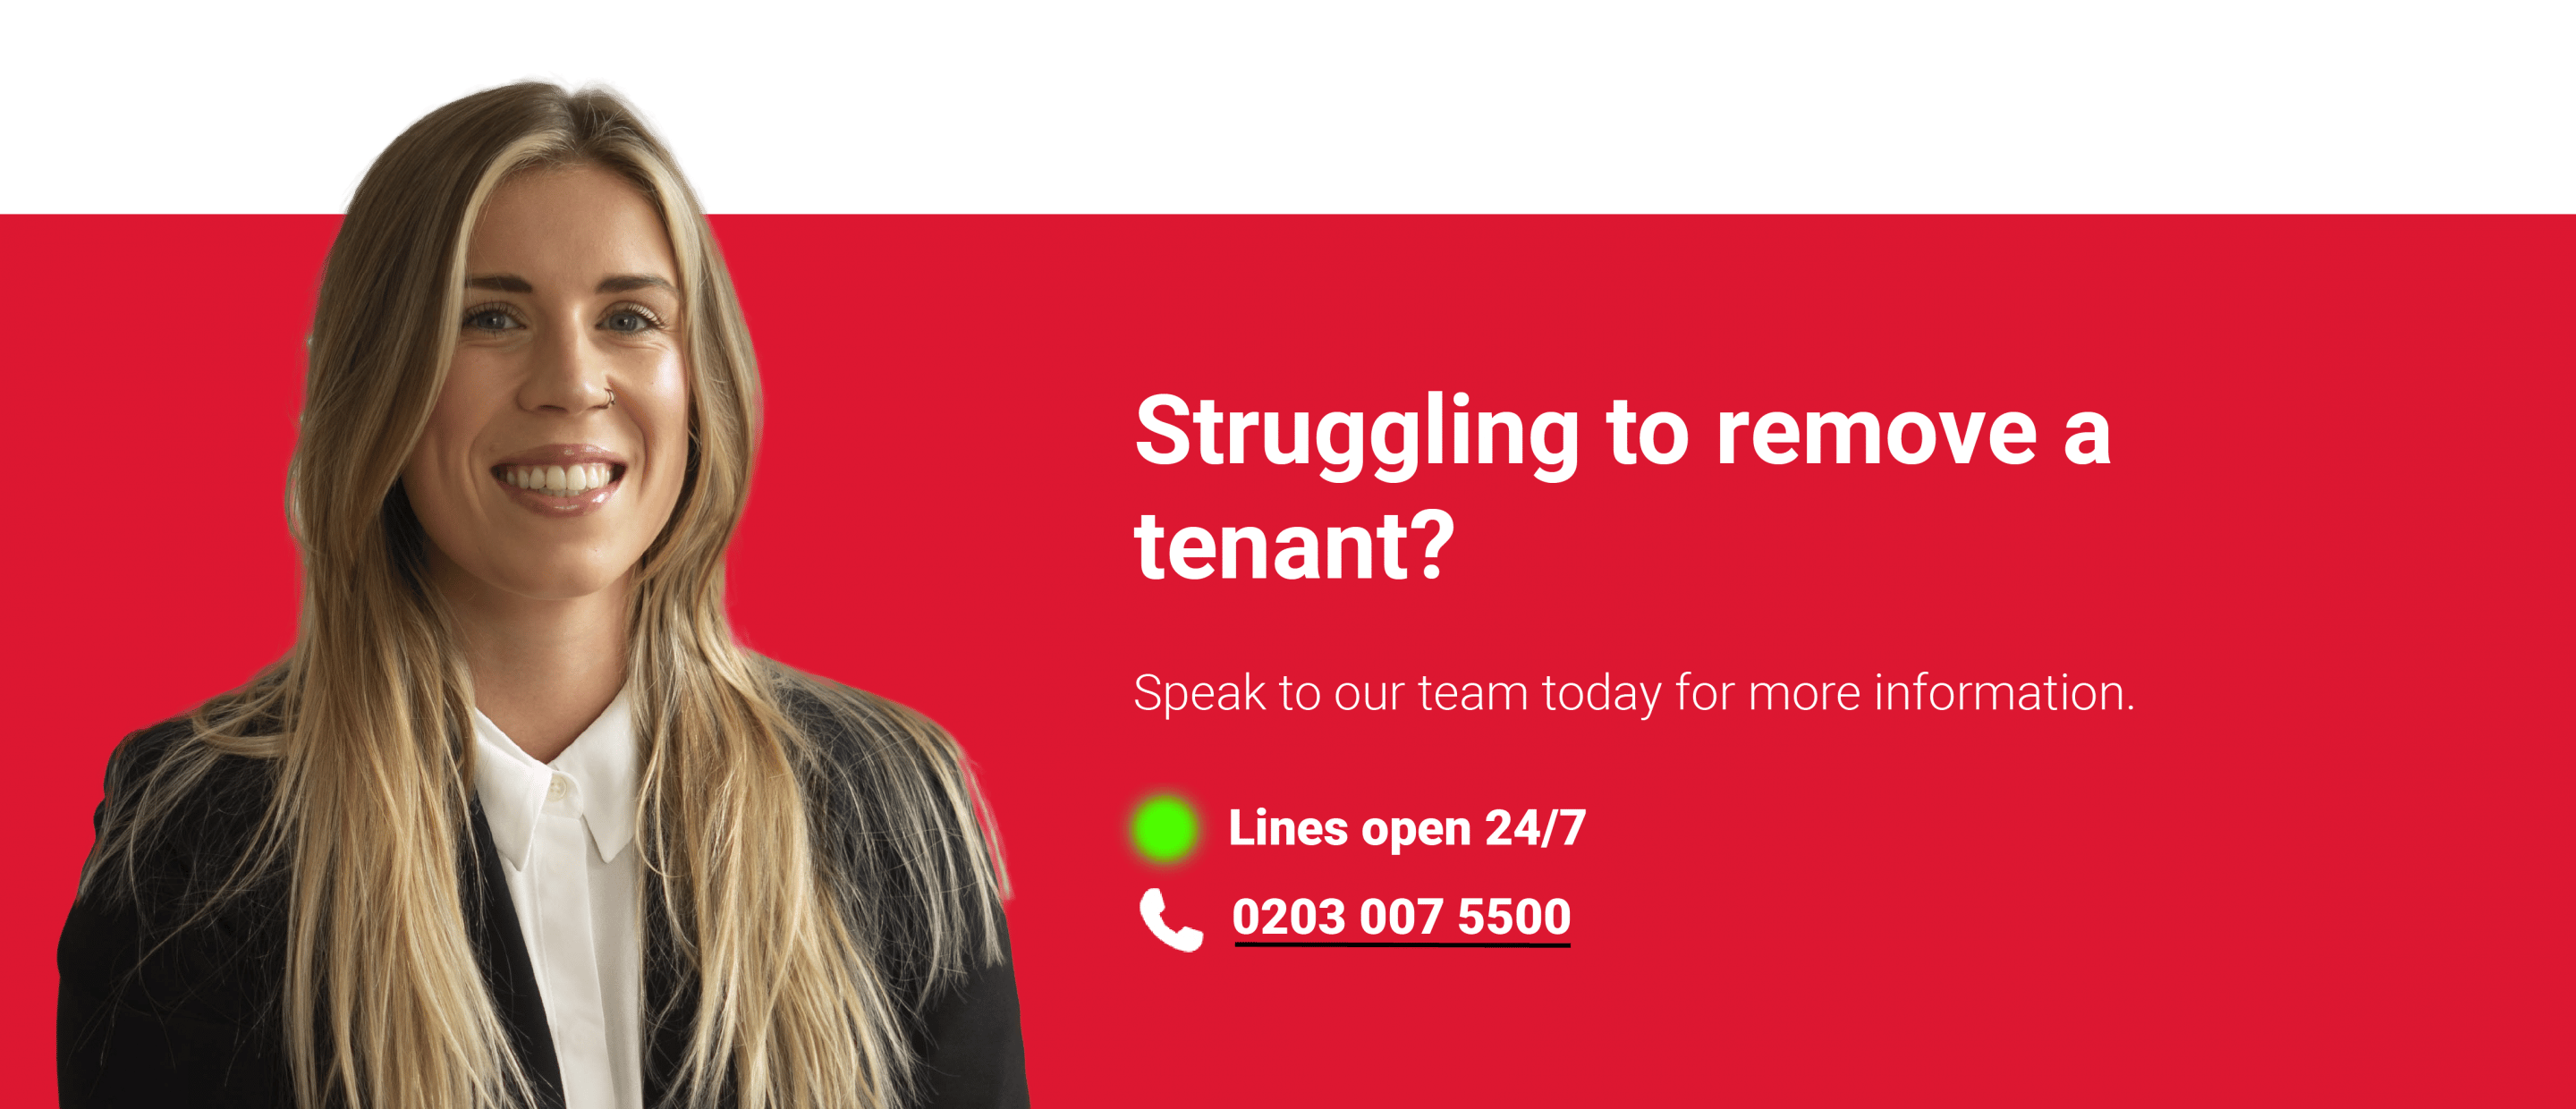 call to action on removing a tenant dt